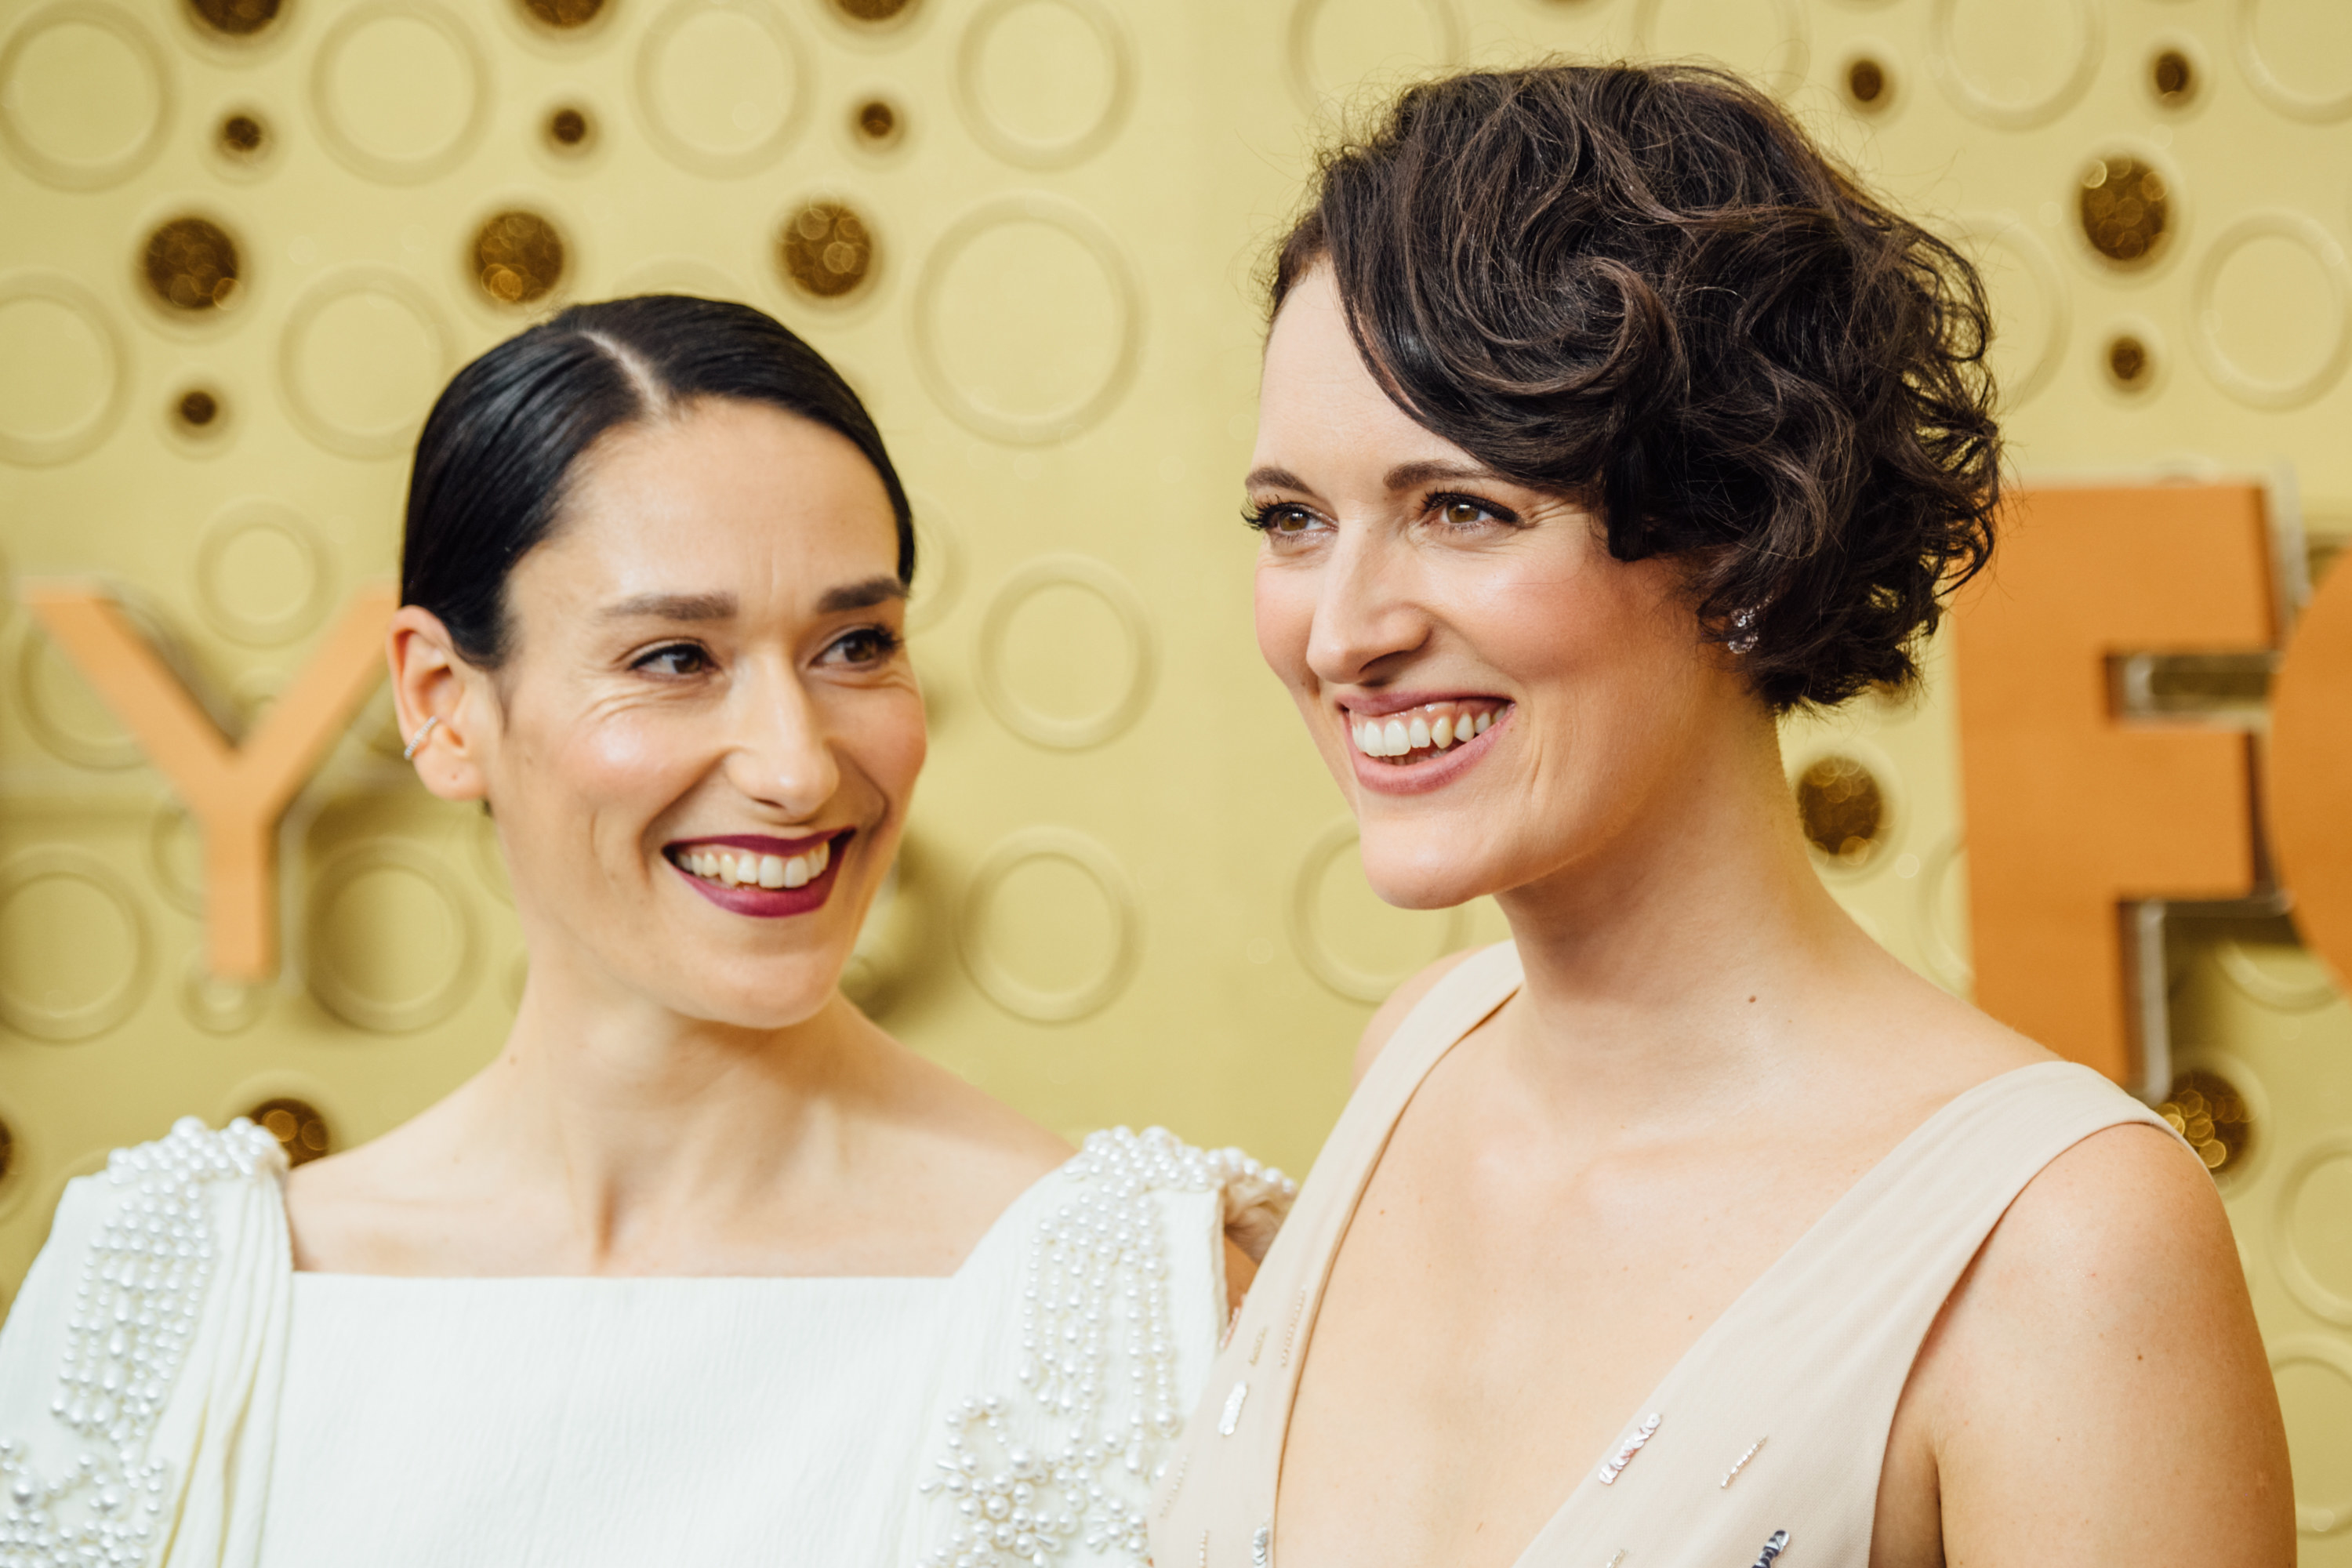 Sian Clifford and Phoebe Waller-Bridge attend the Emmy Awards on September 22, 2019